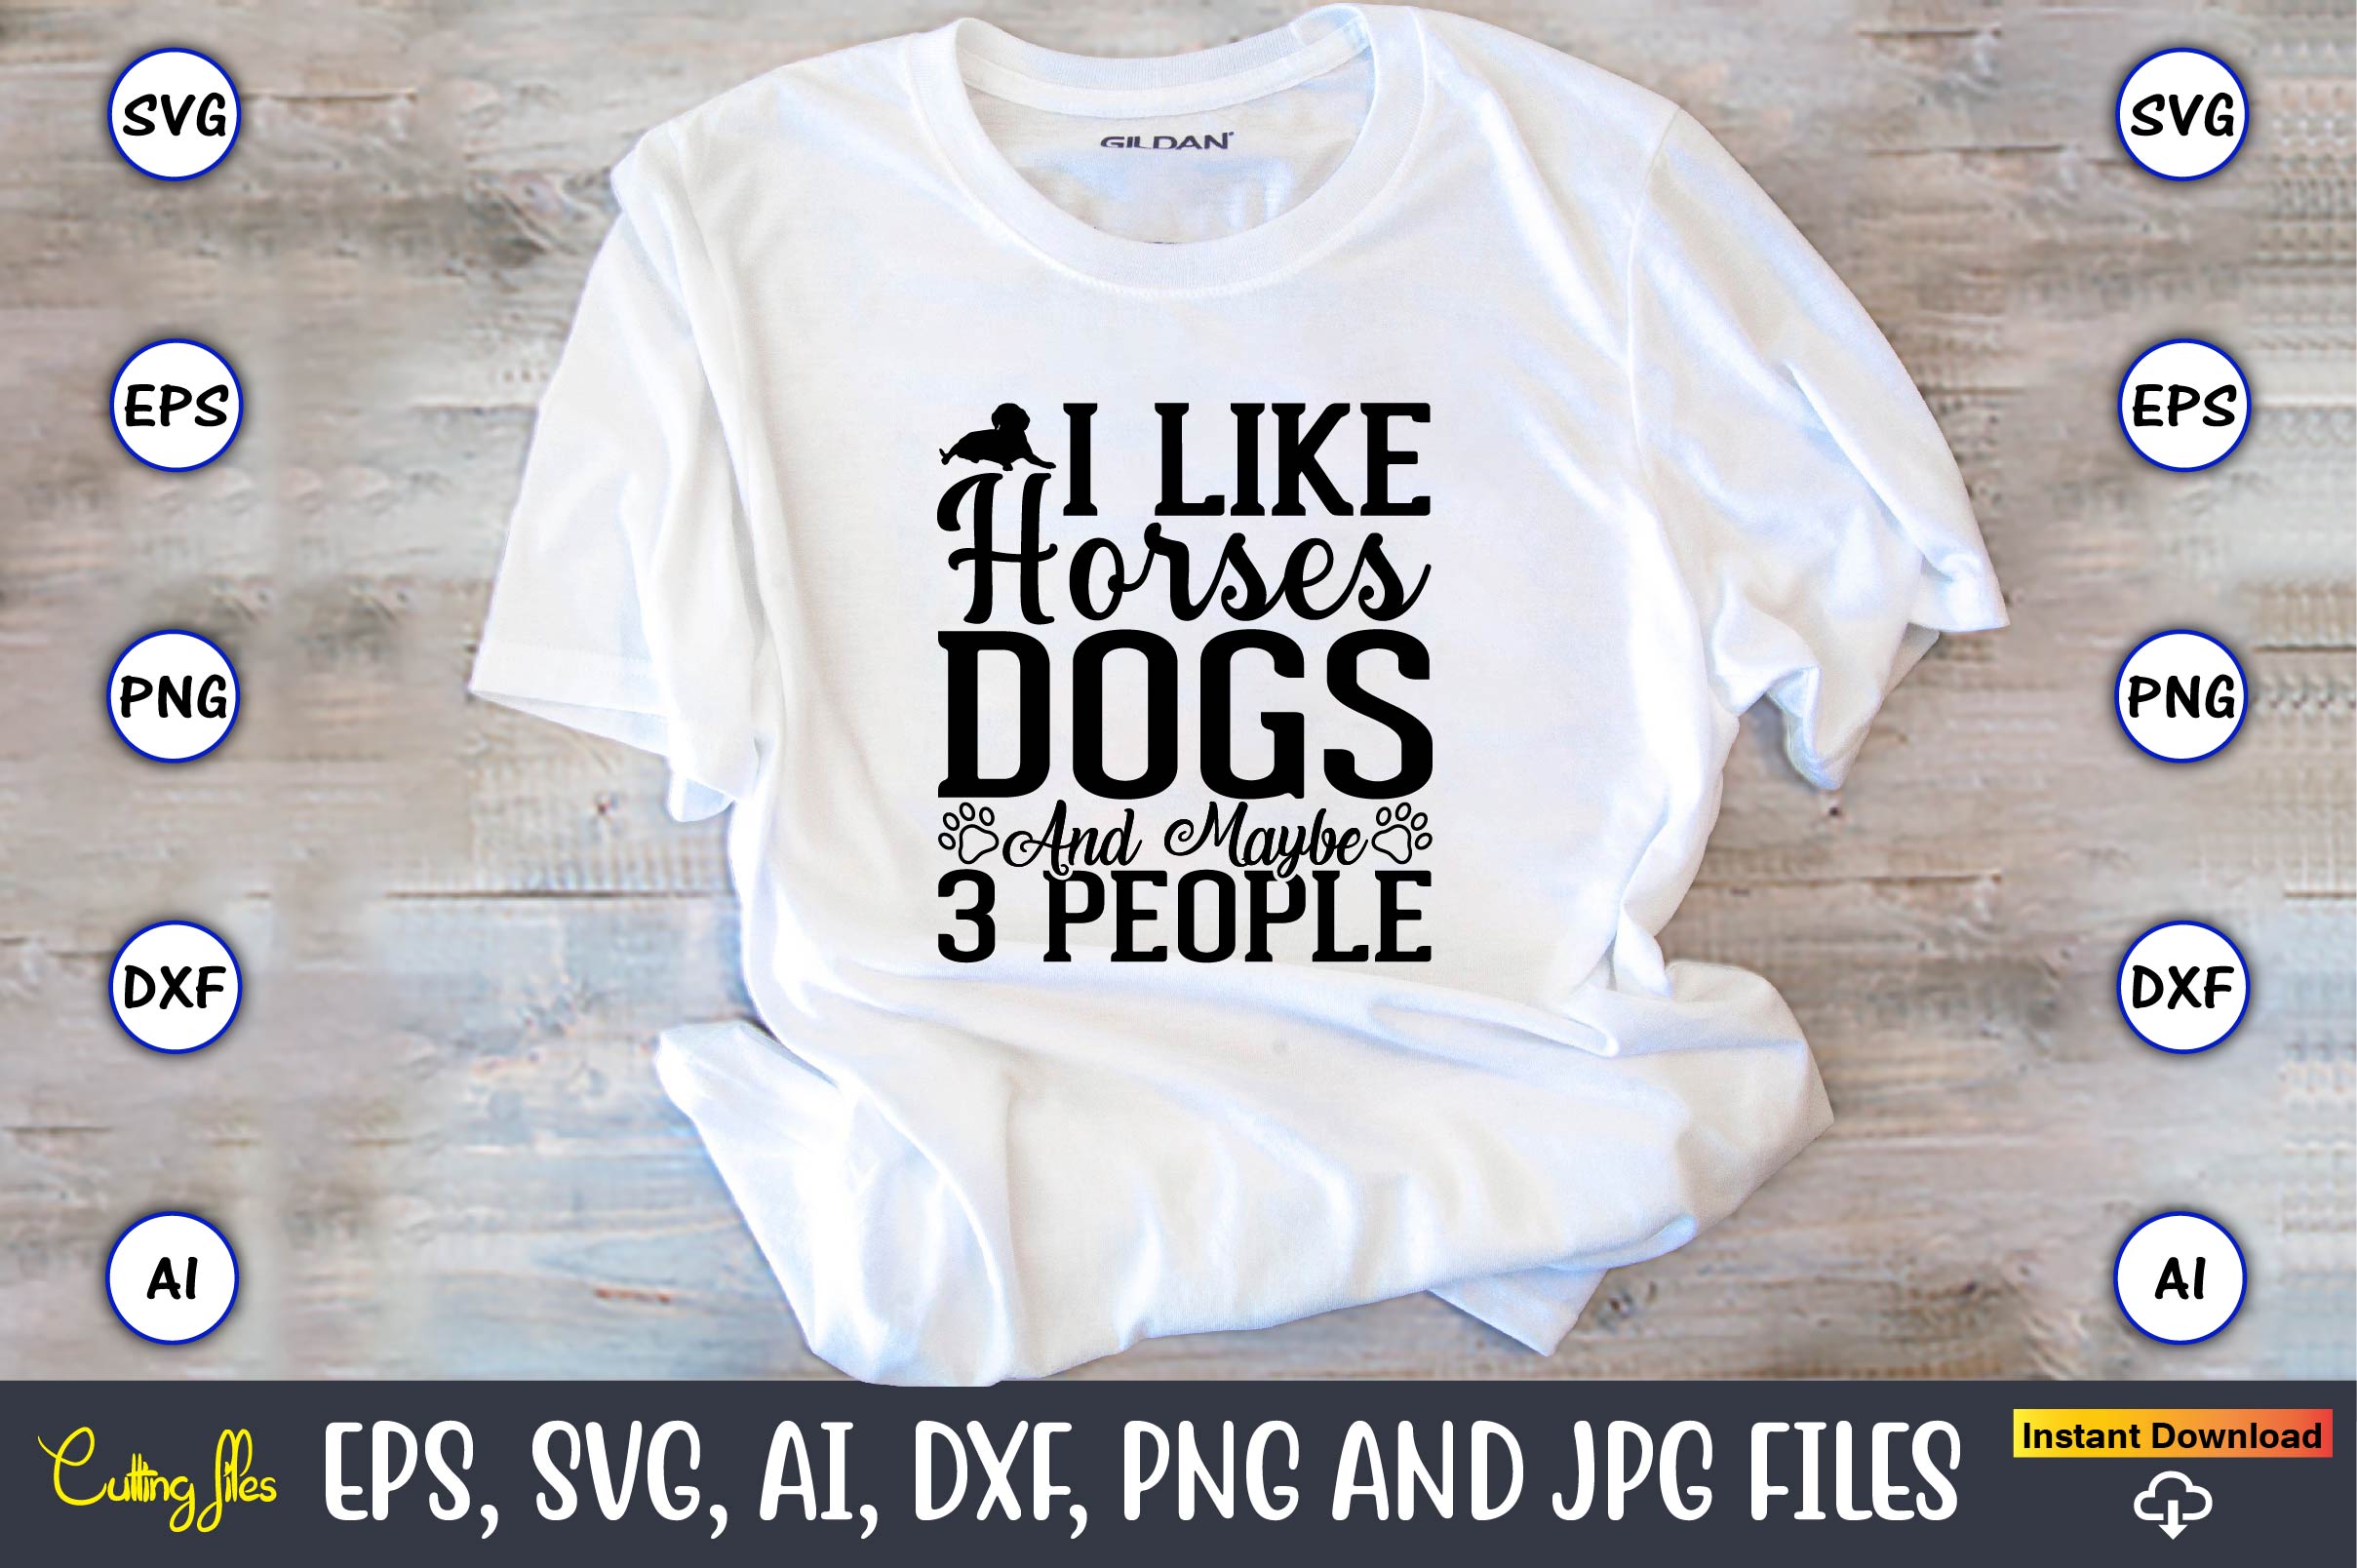 Image of a white t-shirt with an enchanting inscription I like horses dogs and maybe 3 people.